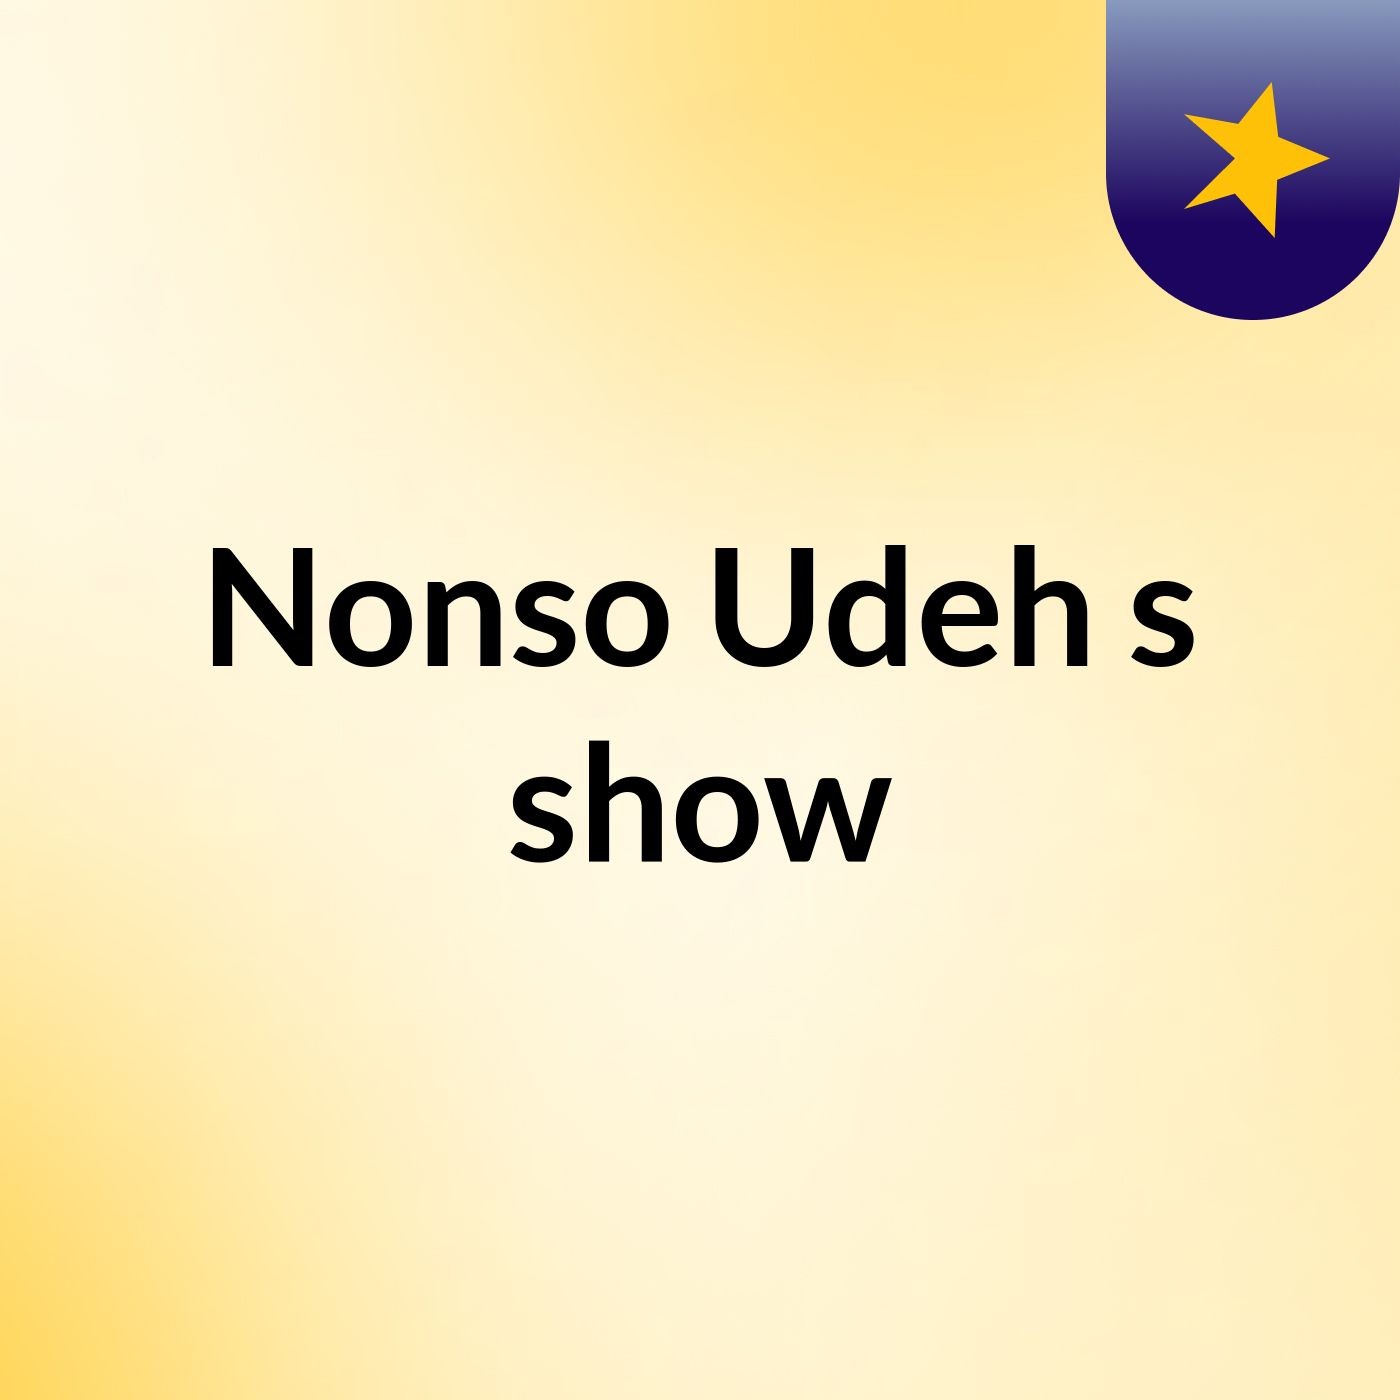 Nonso Udeh's show